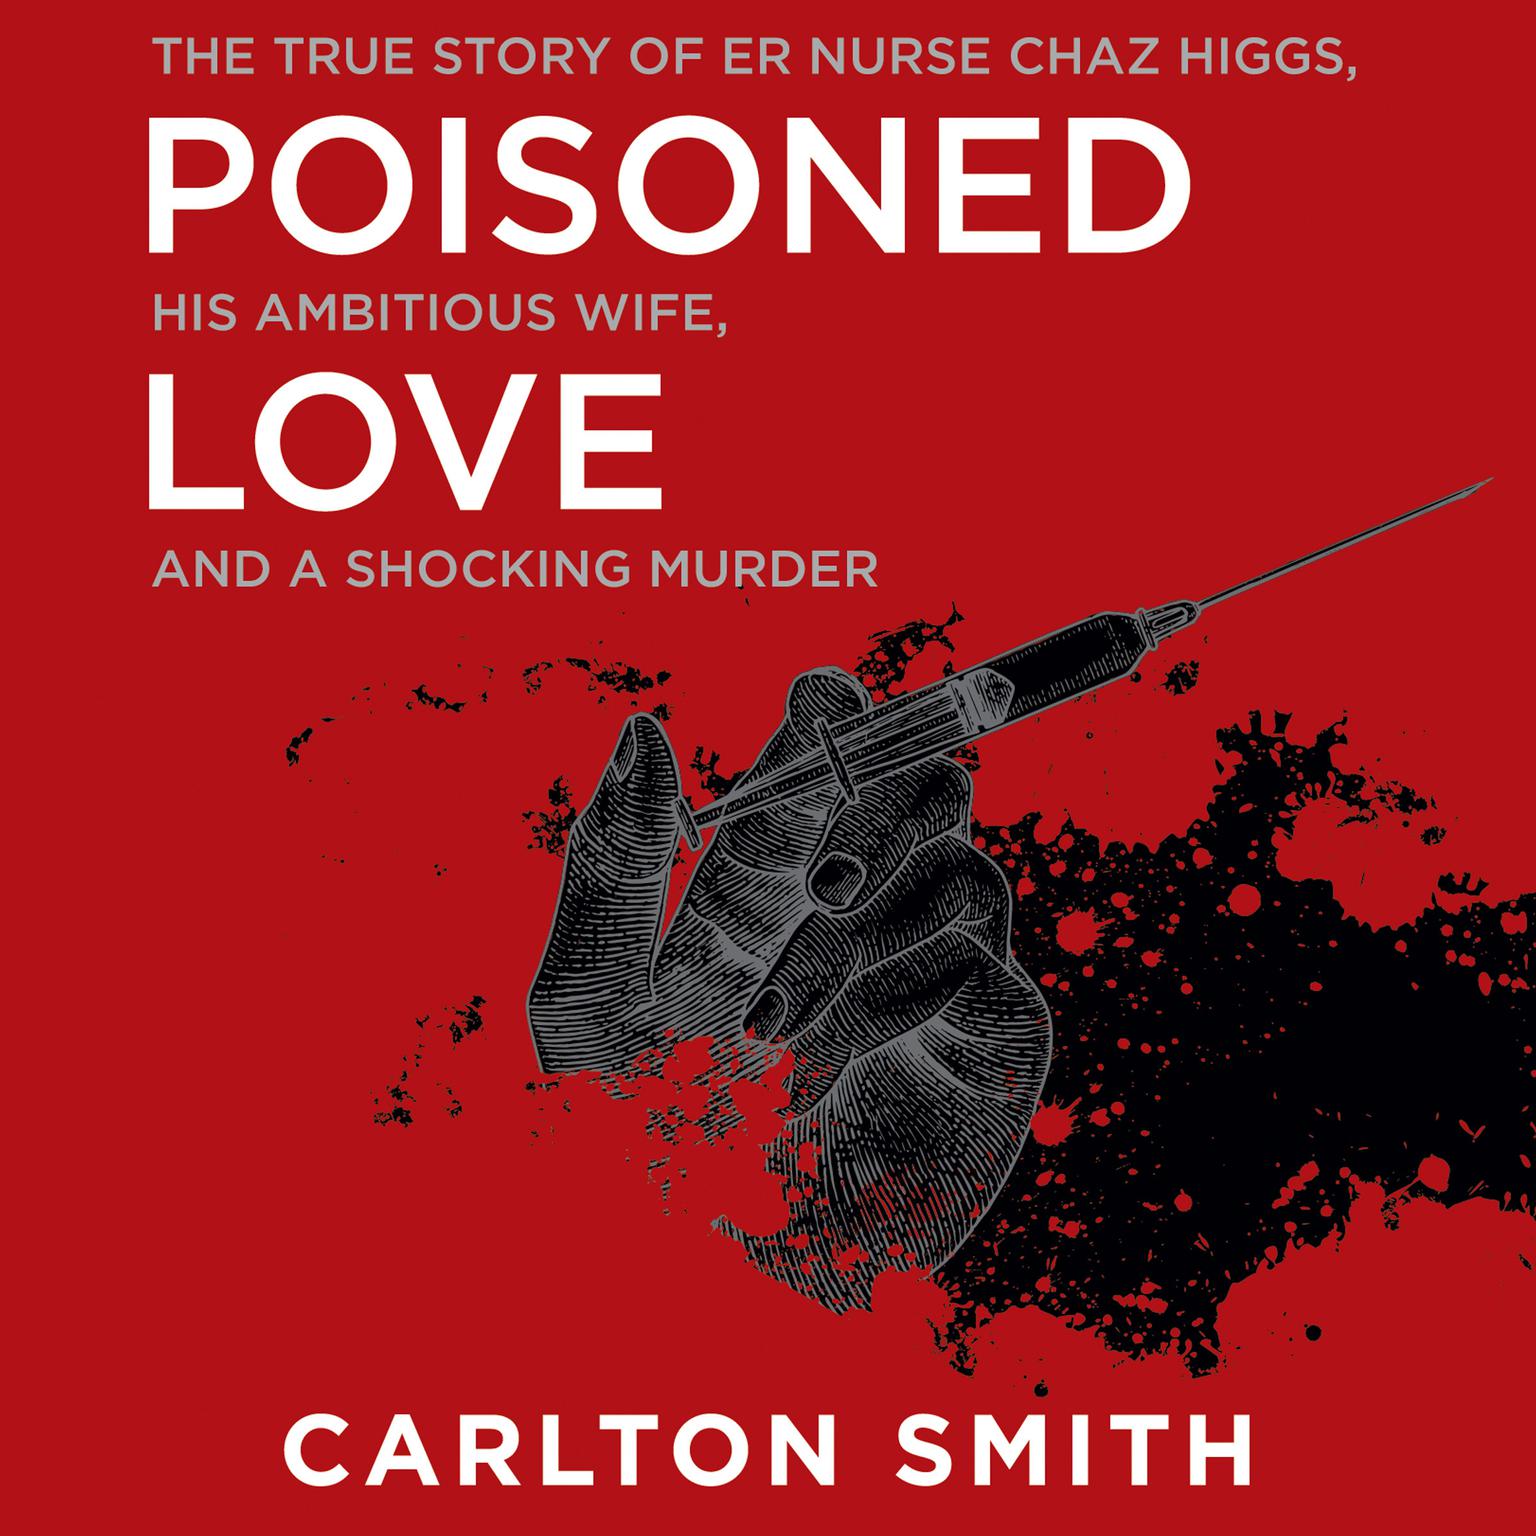 Poisoned Love: The True Story of ER Nurse Chaz Higgs, His Ambitious Wife, and a Shocking Murder Audiobook, by Carlton Smith